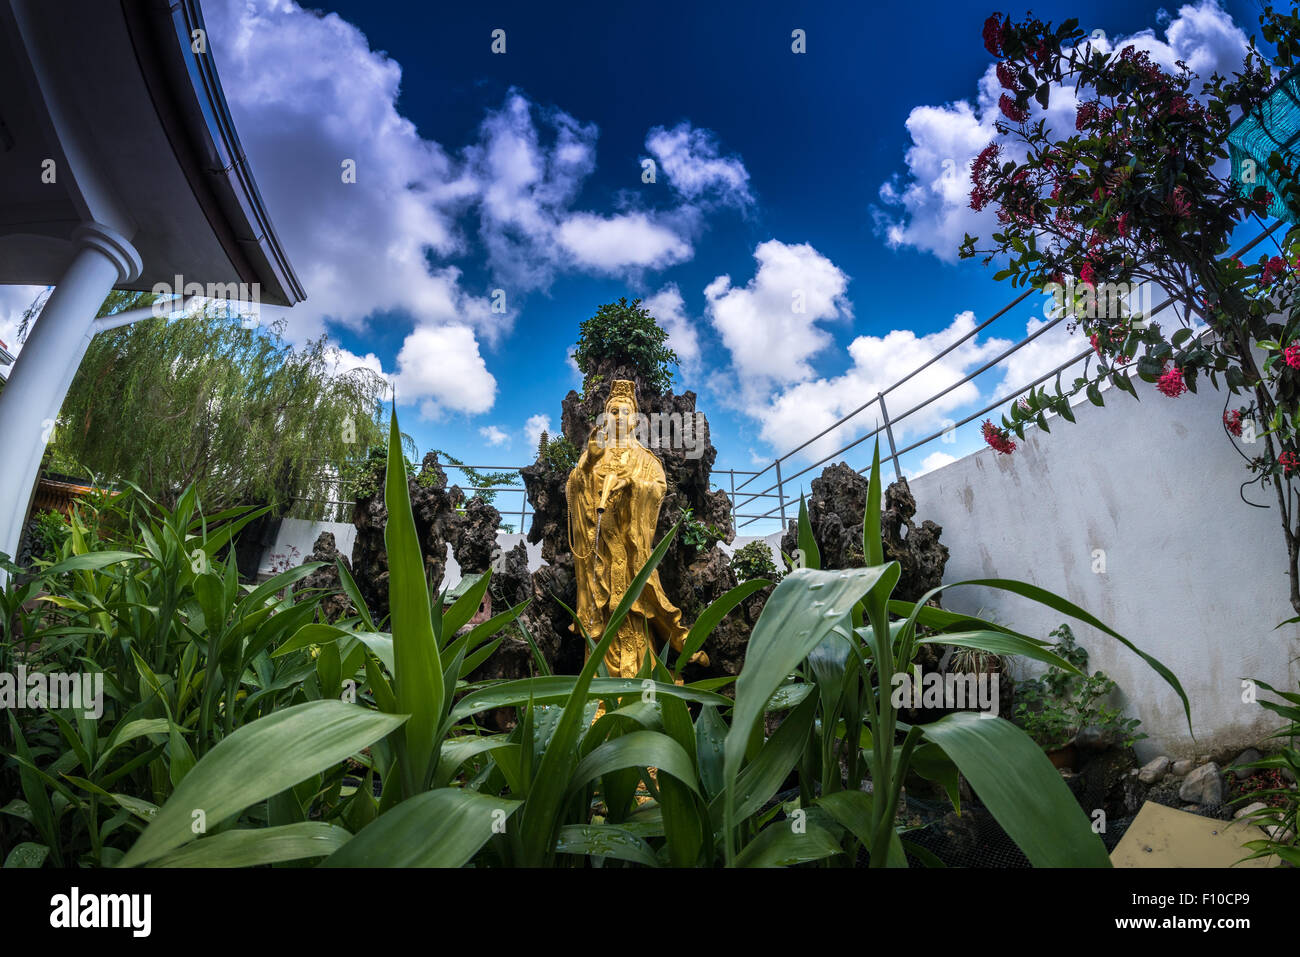 A Guan Yin (Goddess of Compassion) statues from Malaysia, under brightly sunlight. Stock Photo